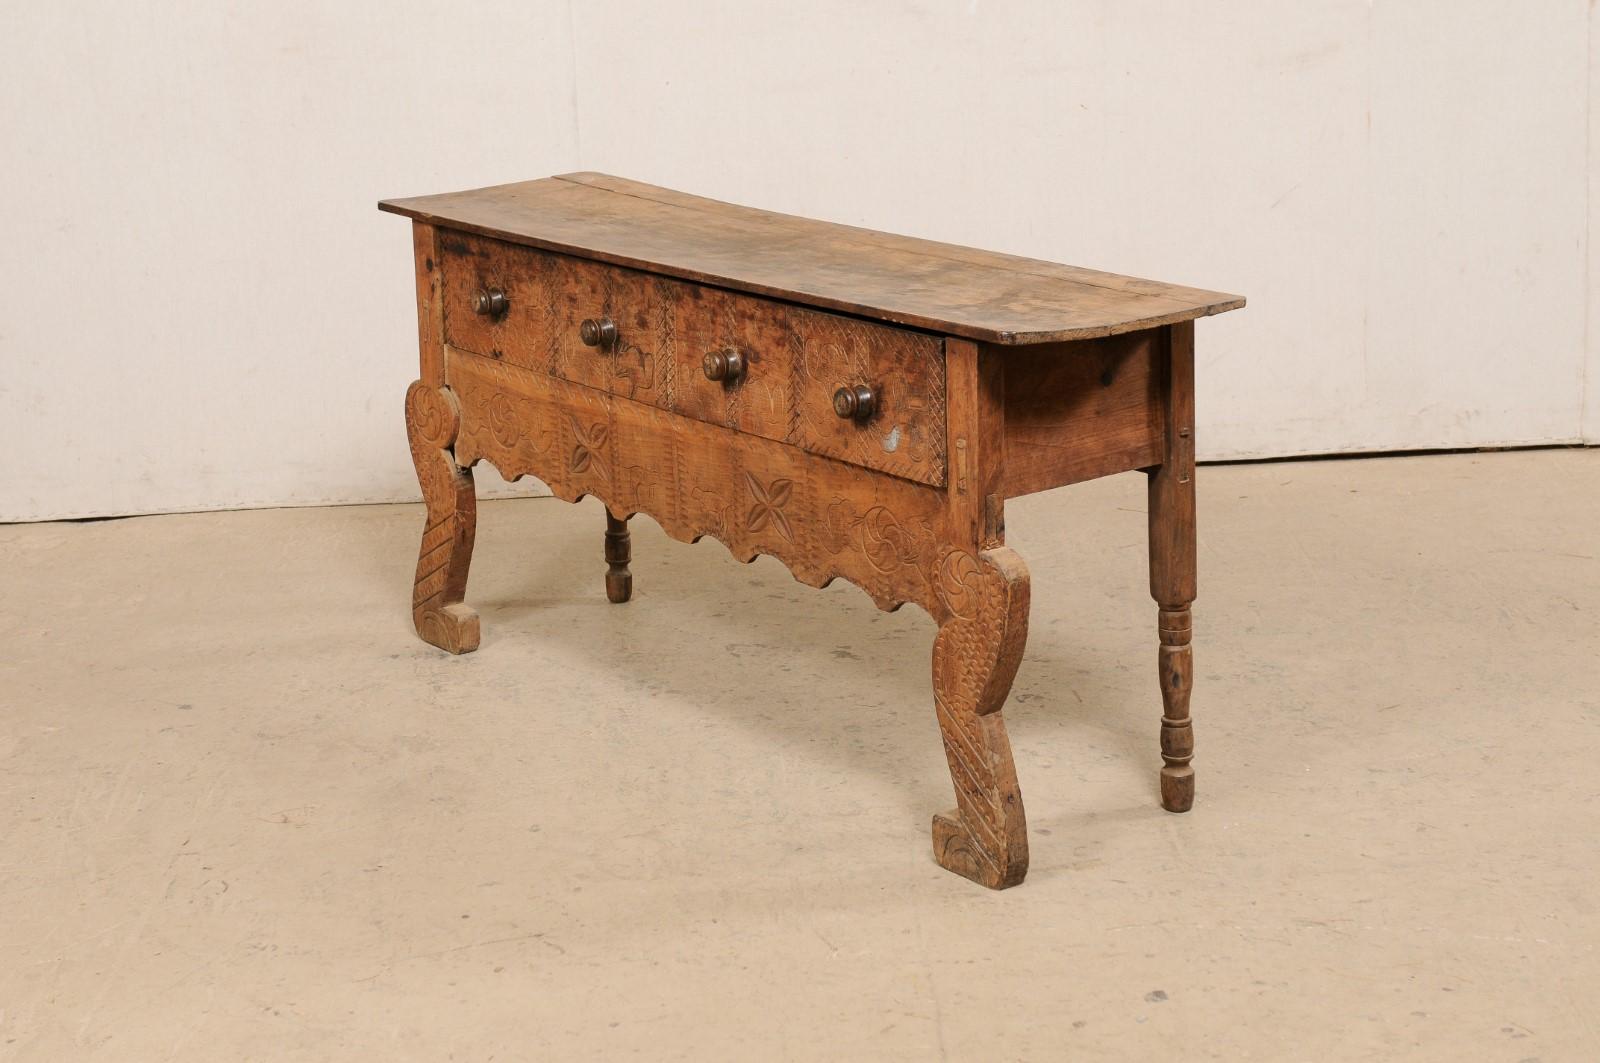 Antique Spanish Colonial Console w/Drawers, Adorn in Primitive-Style Carvings 4